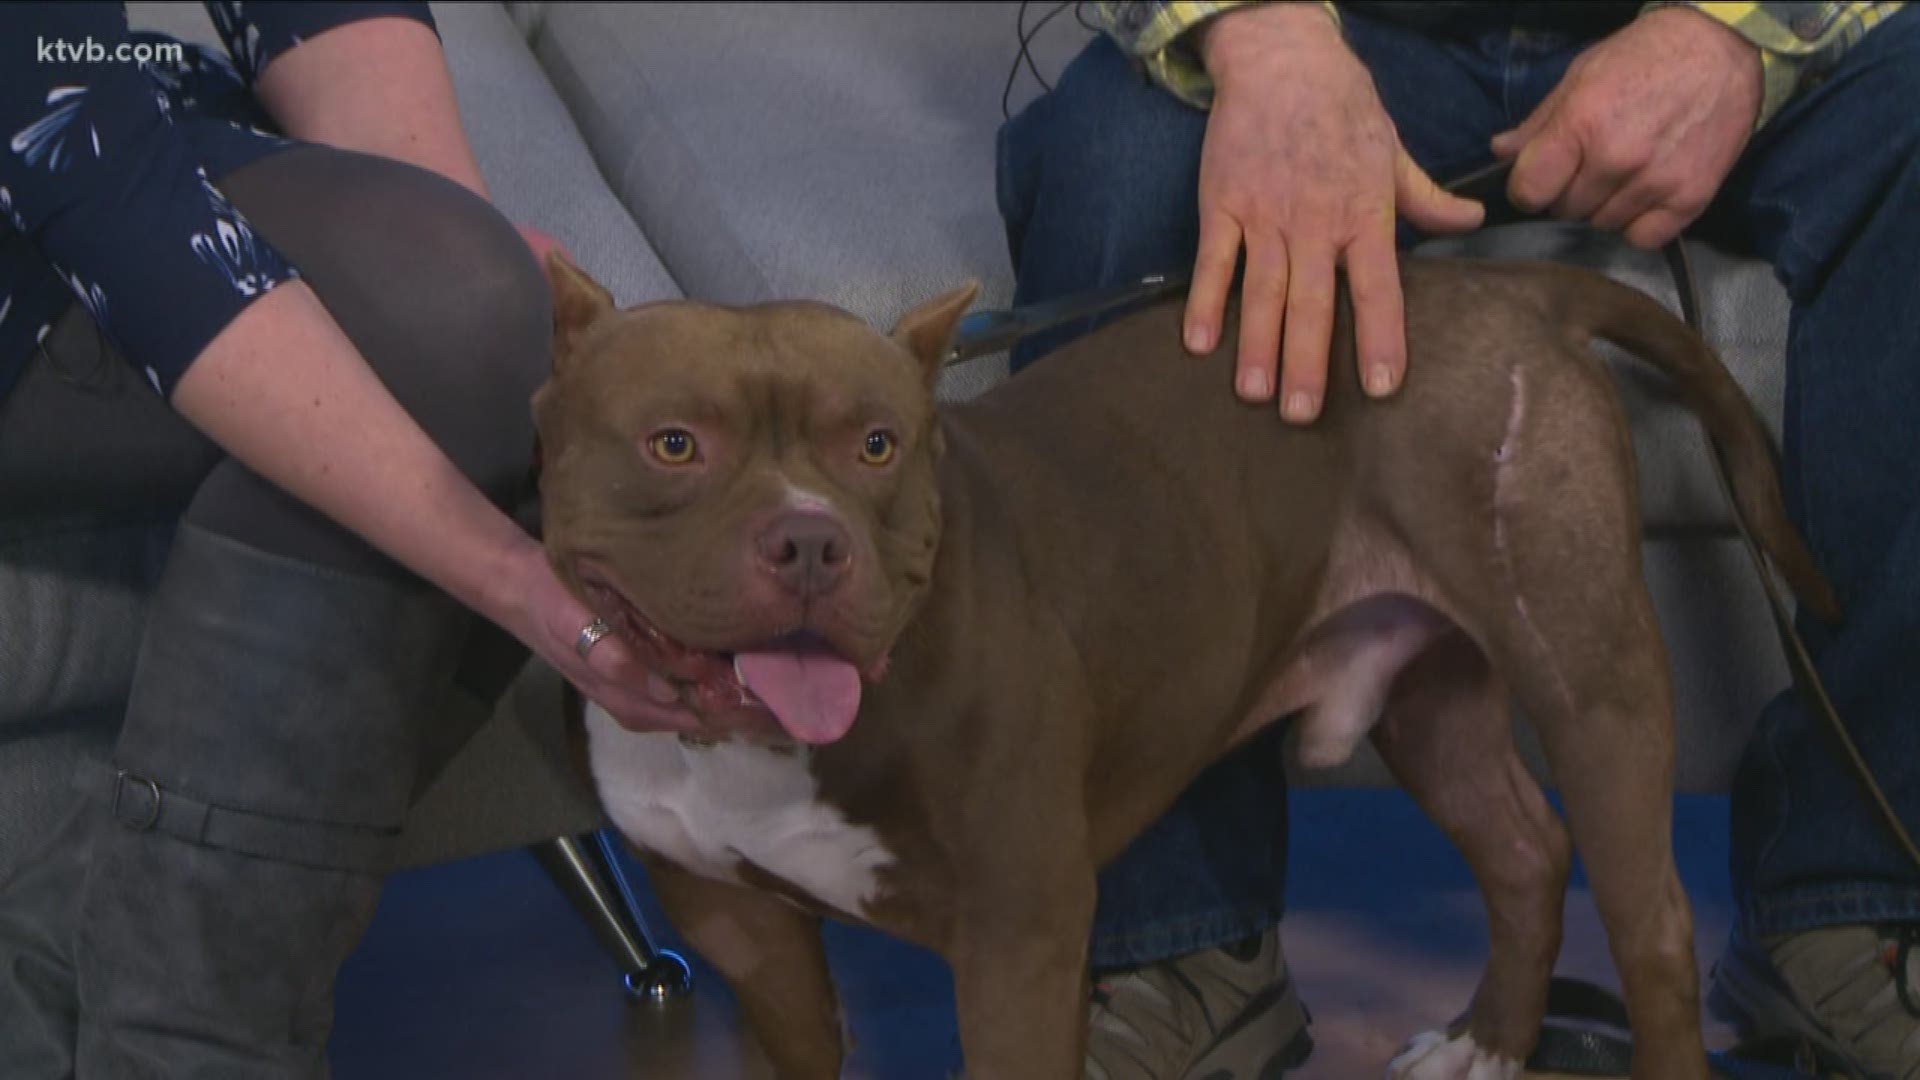 Rex is a sweet dog that is looking for a permanent home. He is available at the Idaho Humane Society.